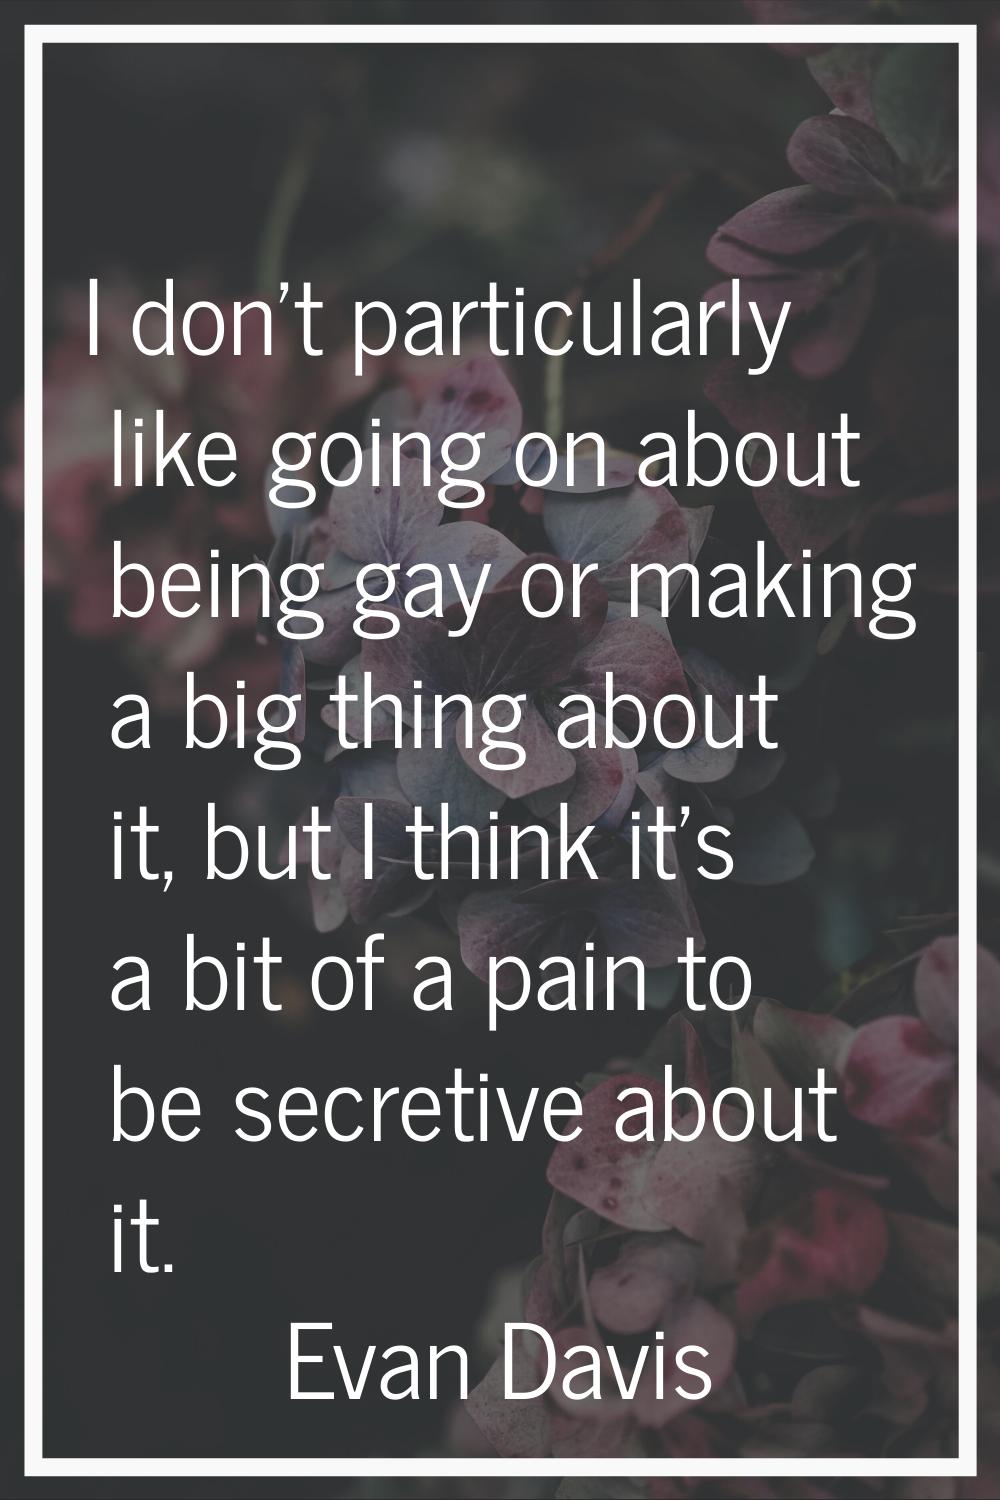 I don't particularly like going on about being gay or making a big thing about it, but I think it's